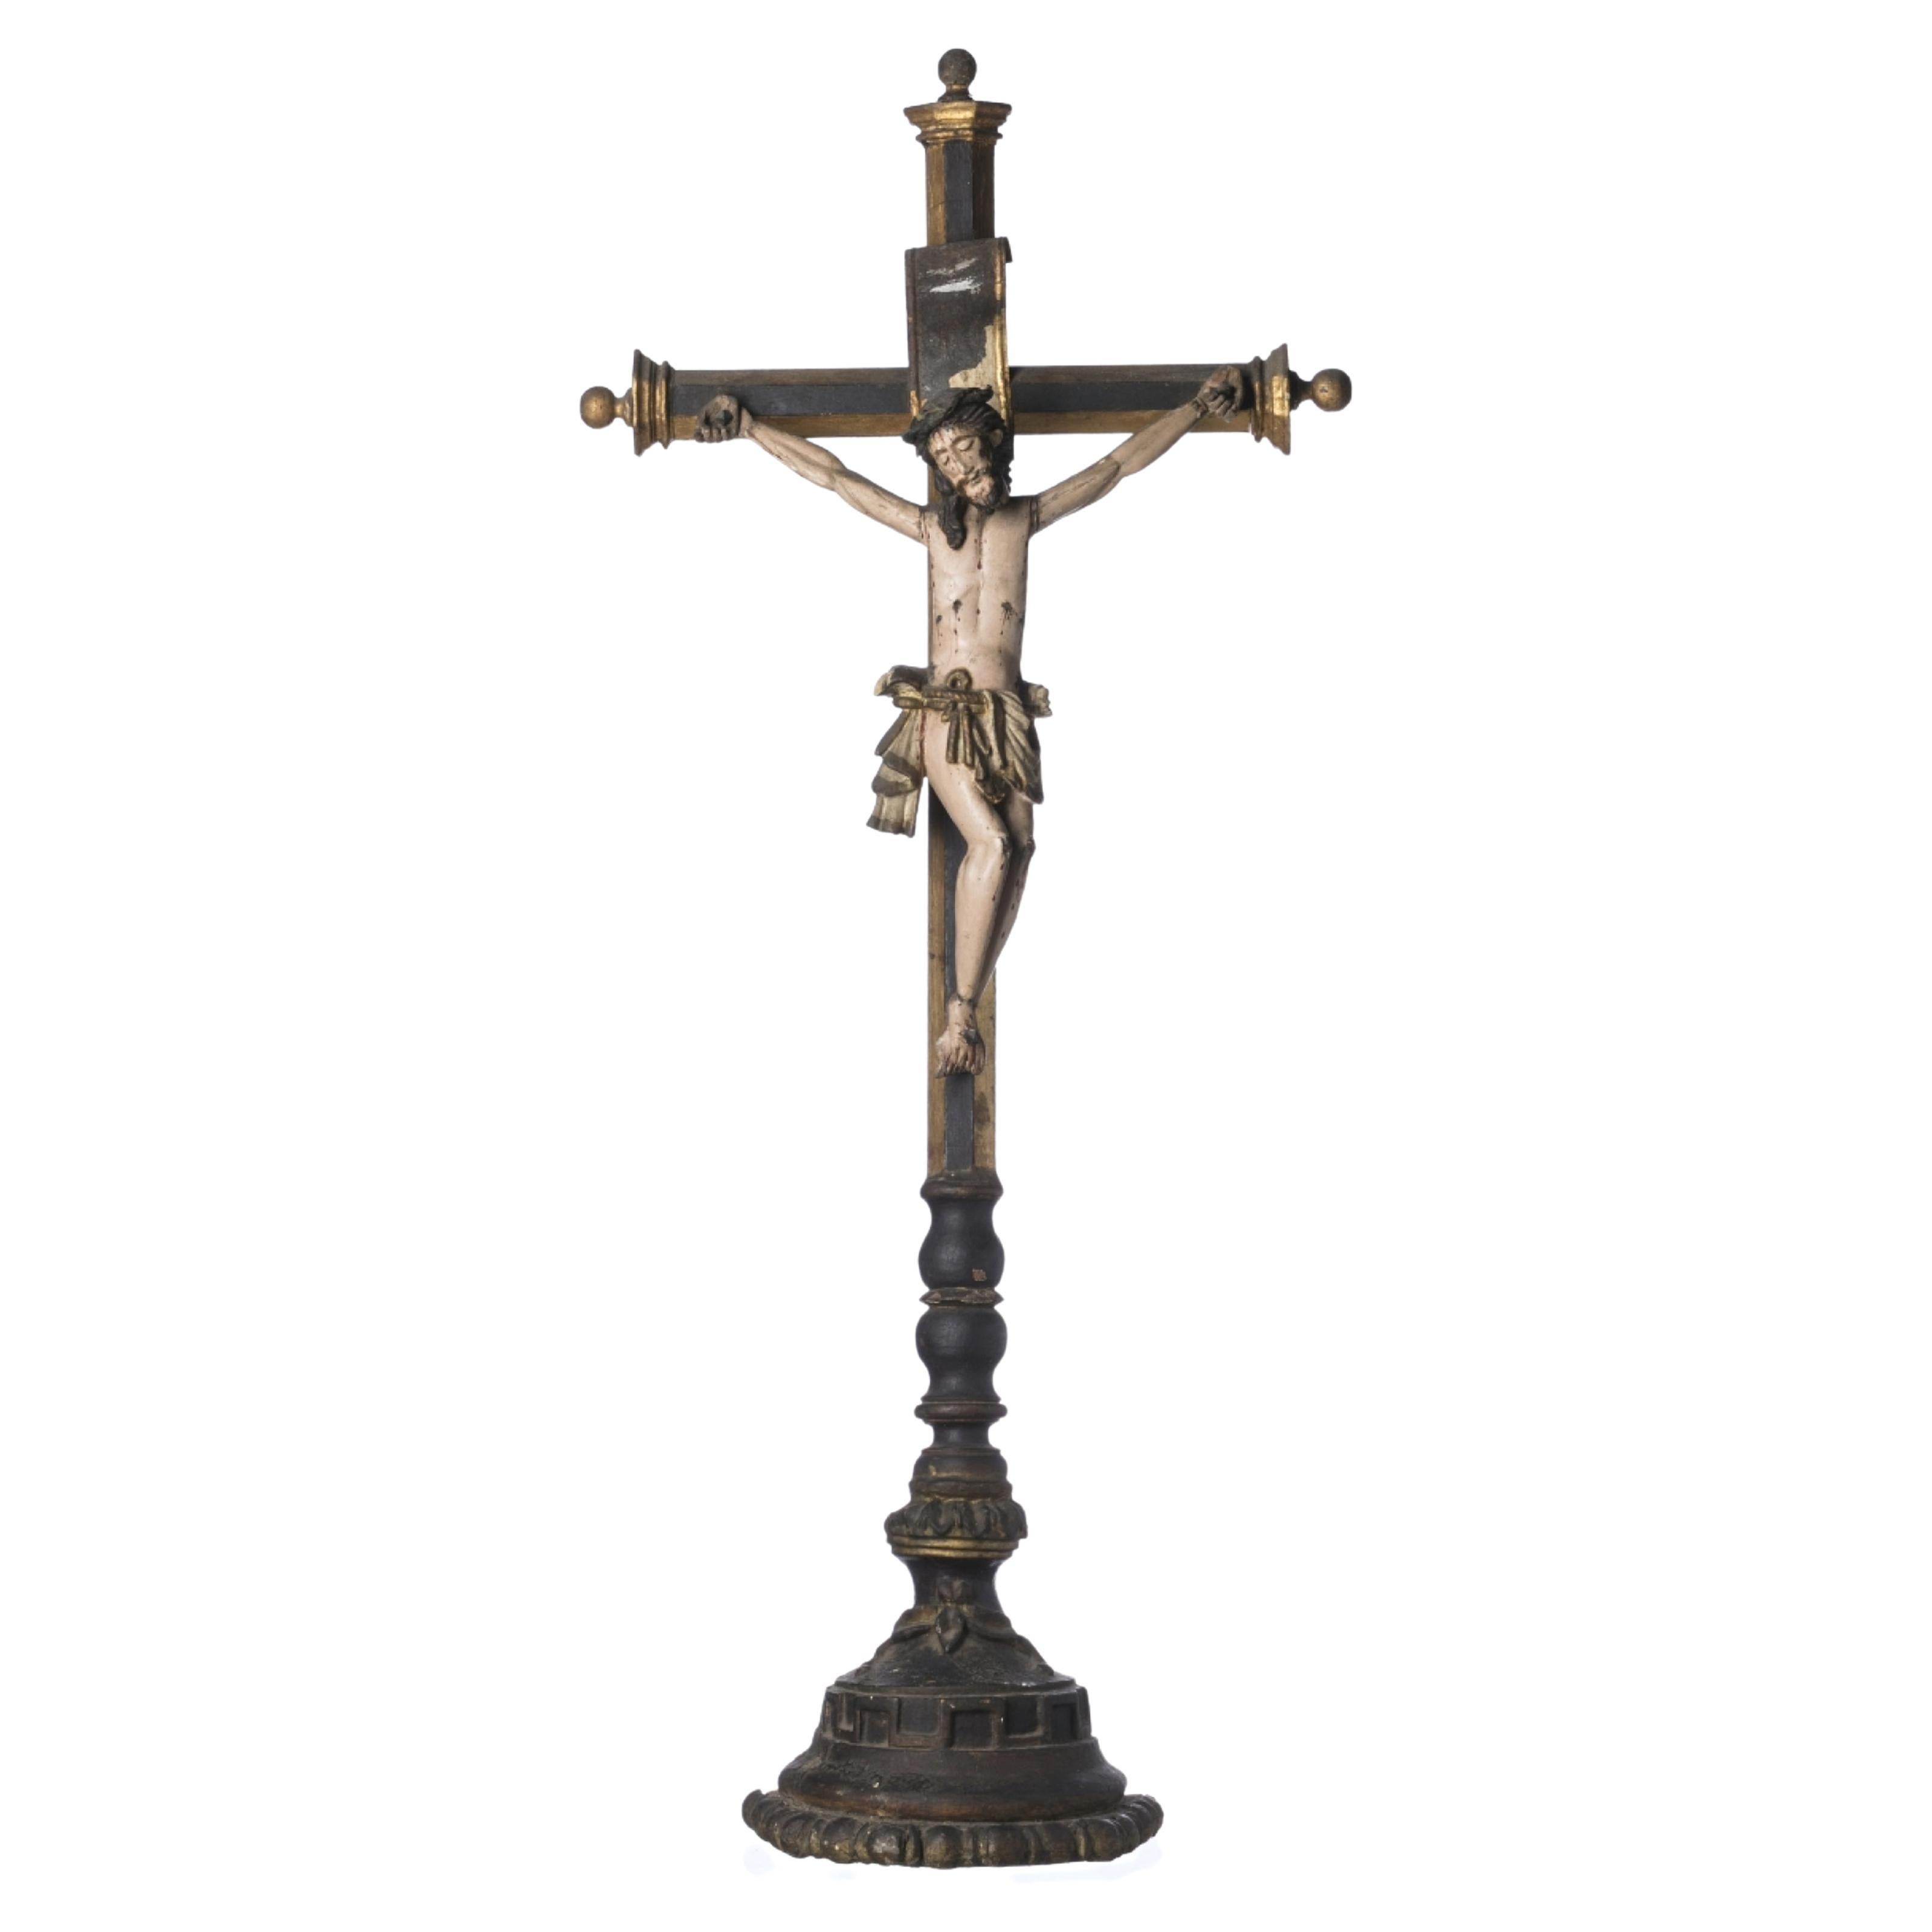 JESUS CHRIST CRUCIFIED Portuguese Sculpture from the 17th Century